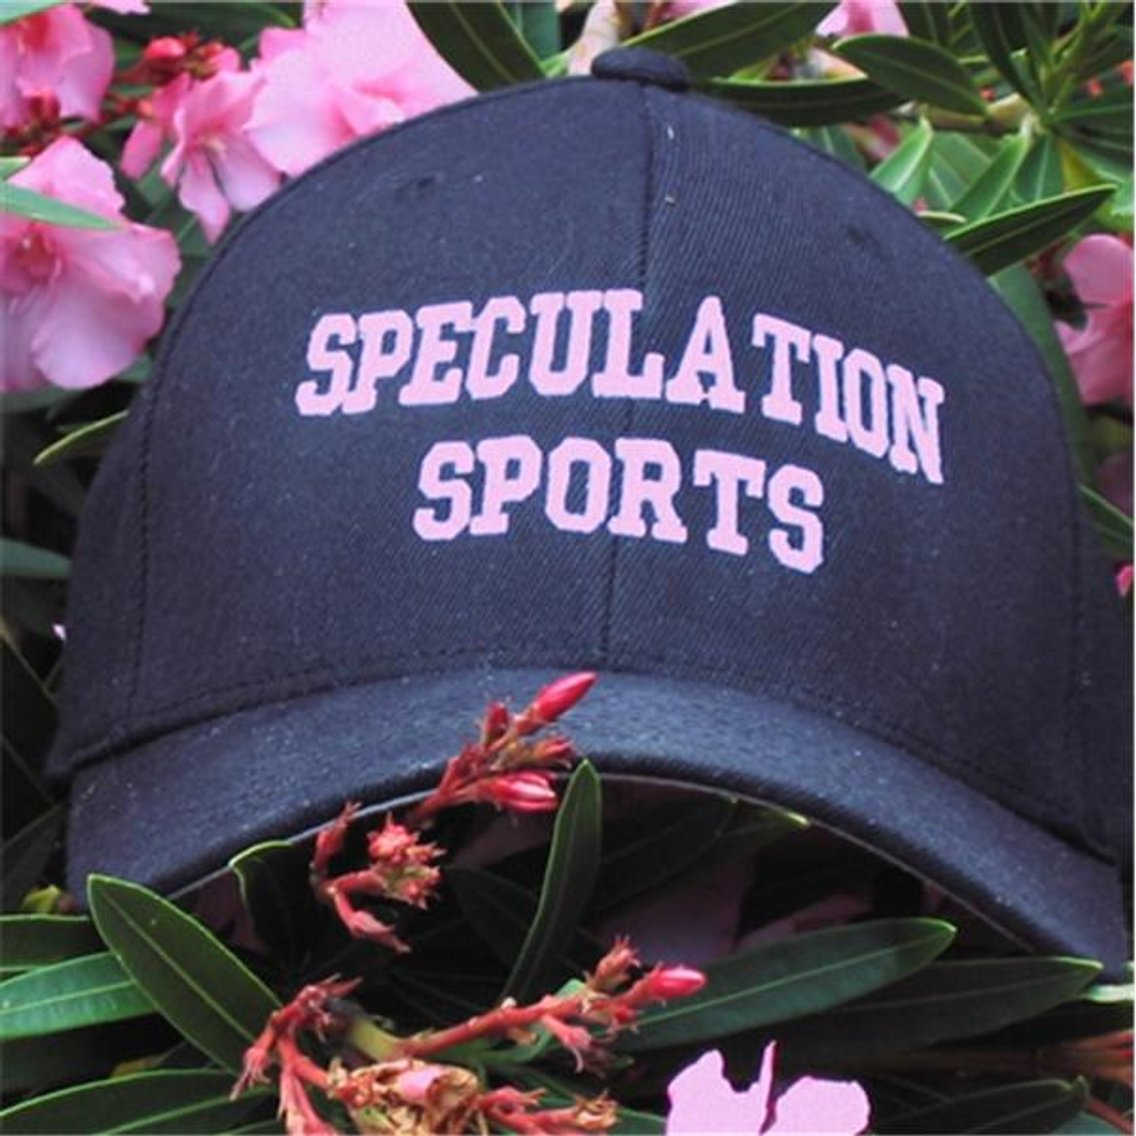 SPECULATION SPORTS - Cover Image